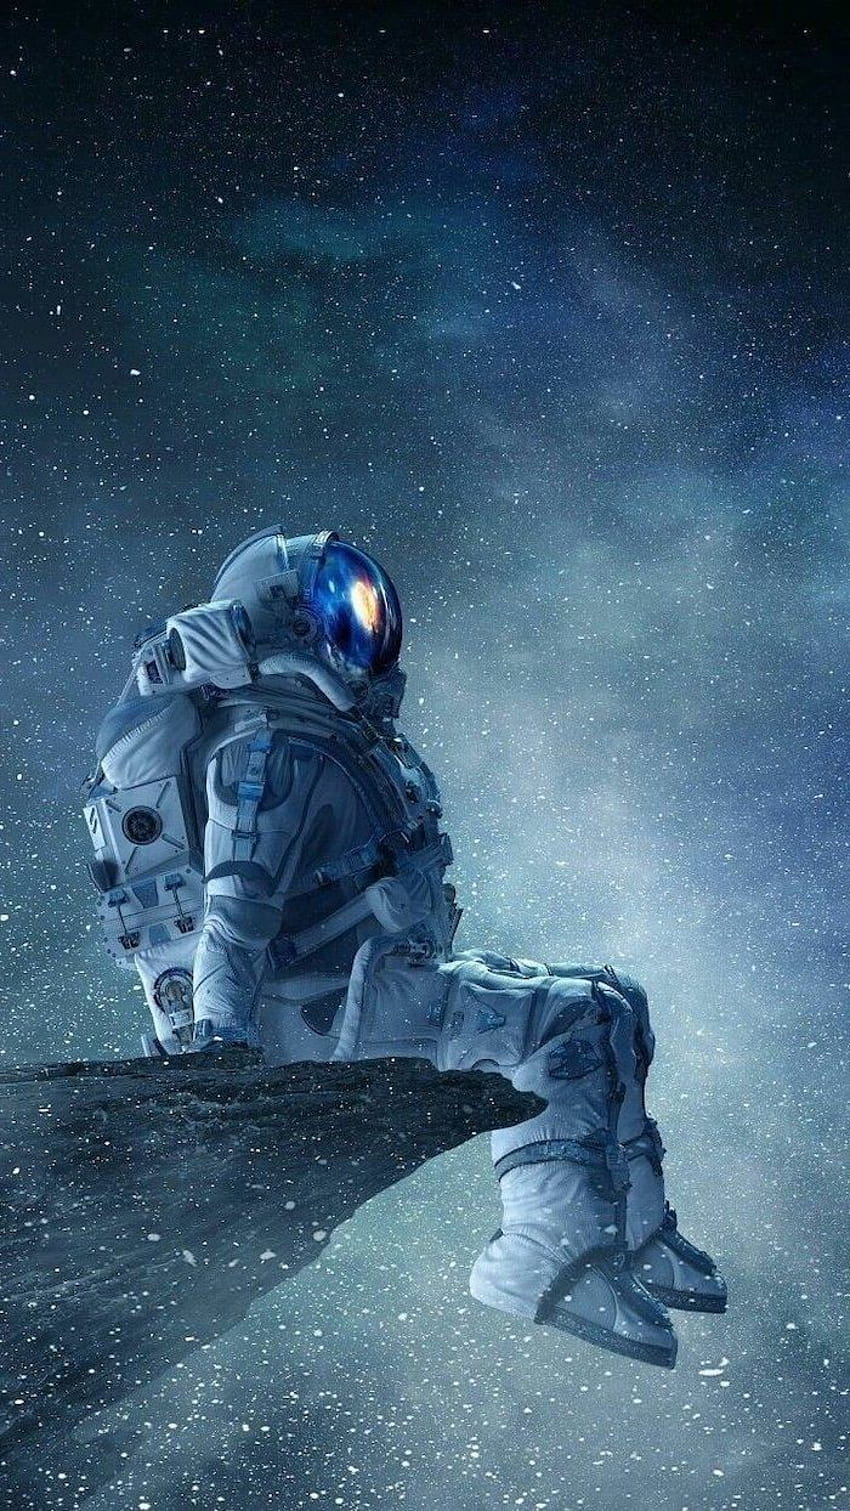 A man in an astronaut suit sitting on the edge of something - Astronaut, galaxy, cool